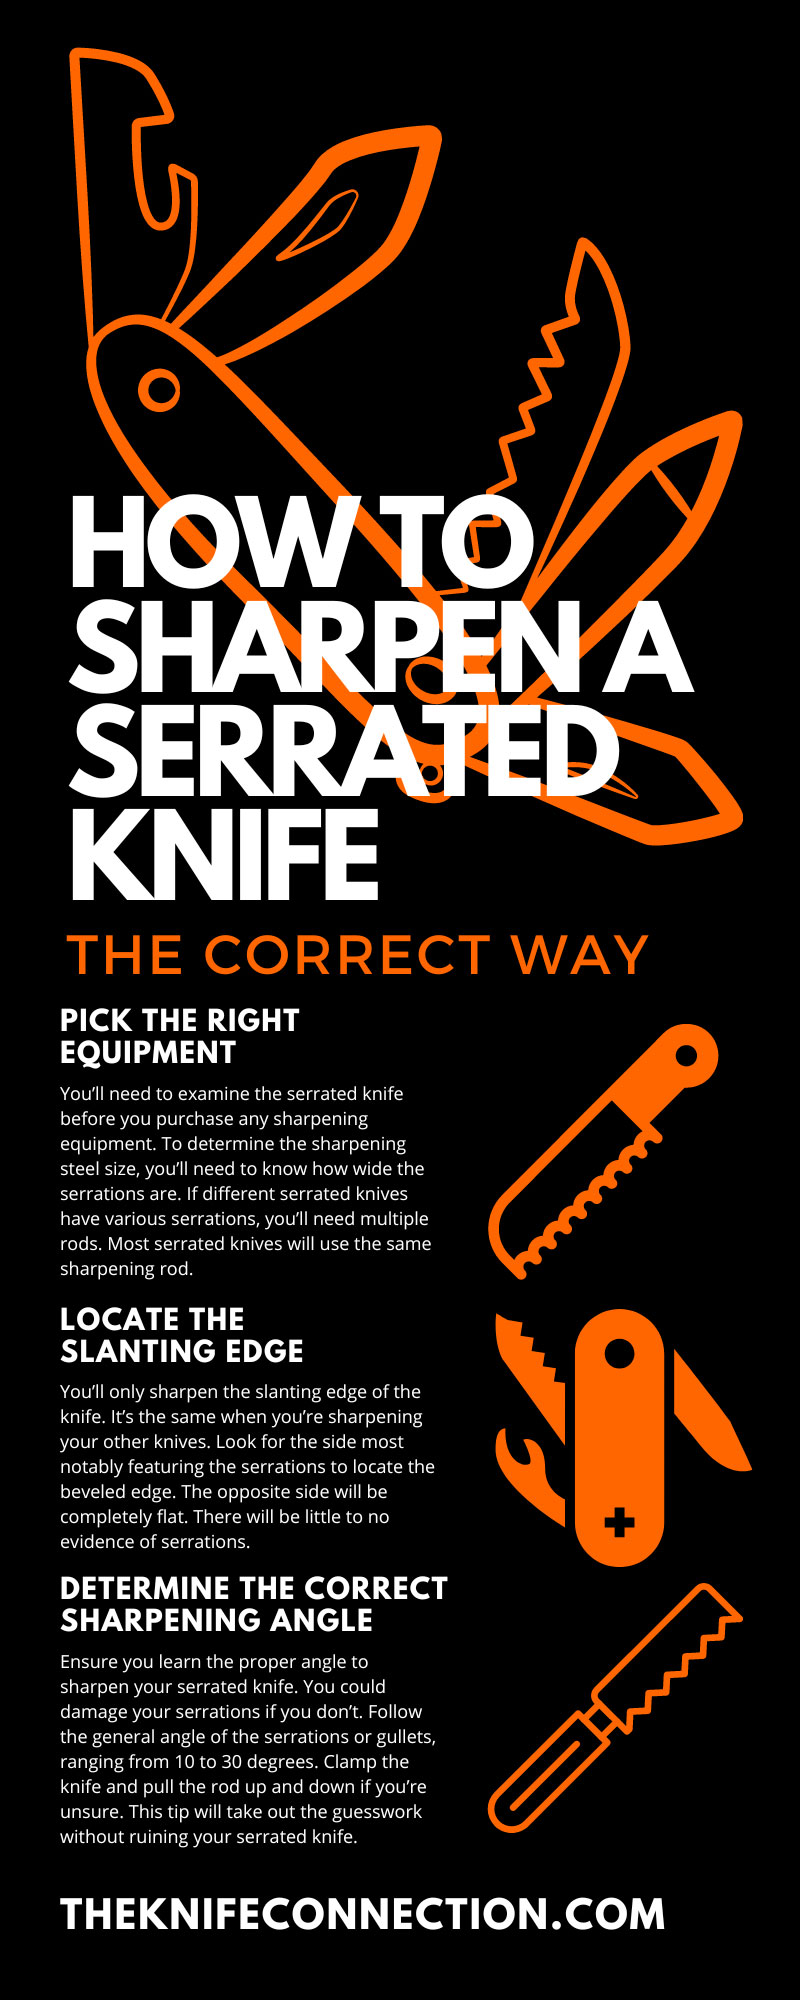 How To Sharpen a Serrated Knife the Correct Way